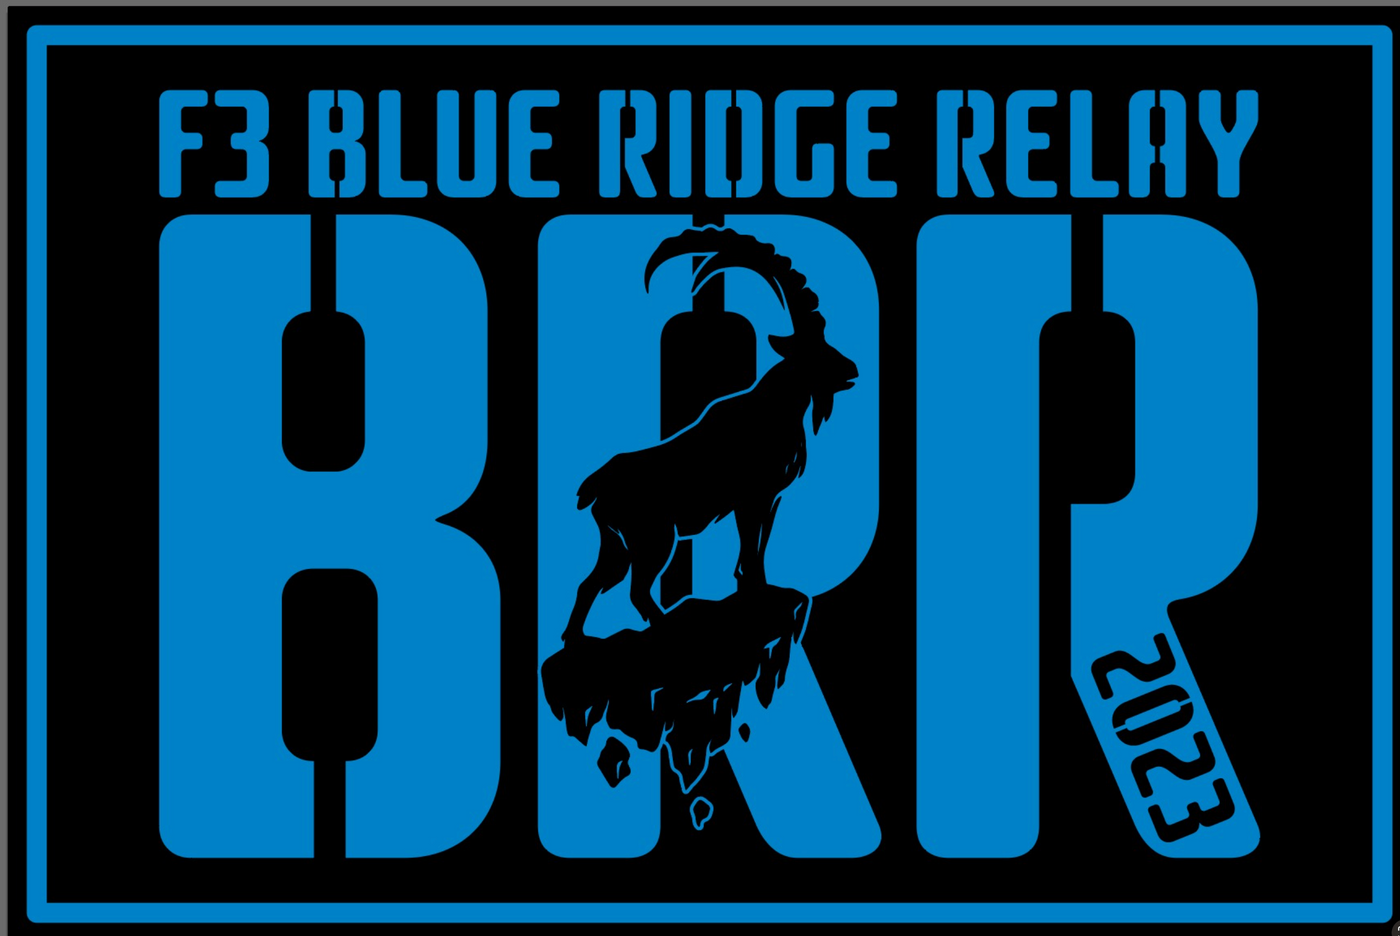 CLEARANCE ITEM - F3 2023 Blue Ridge Relay Patch